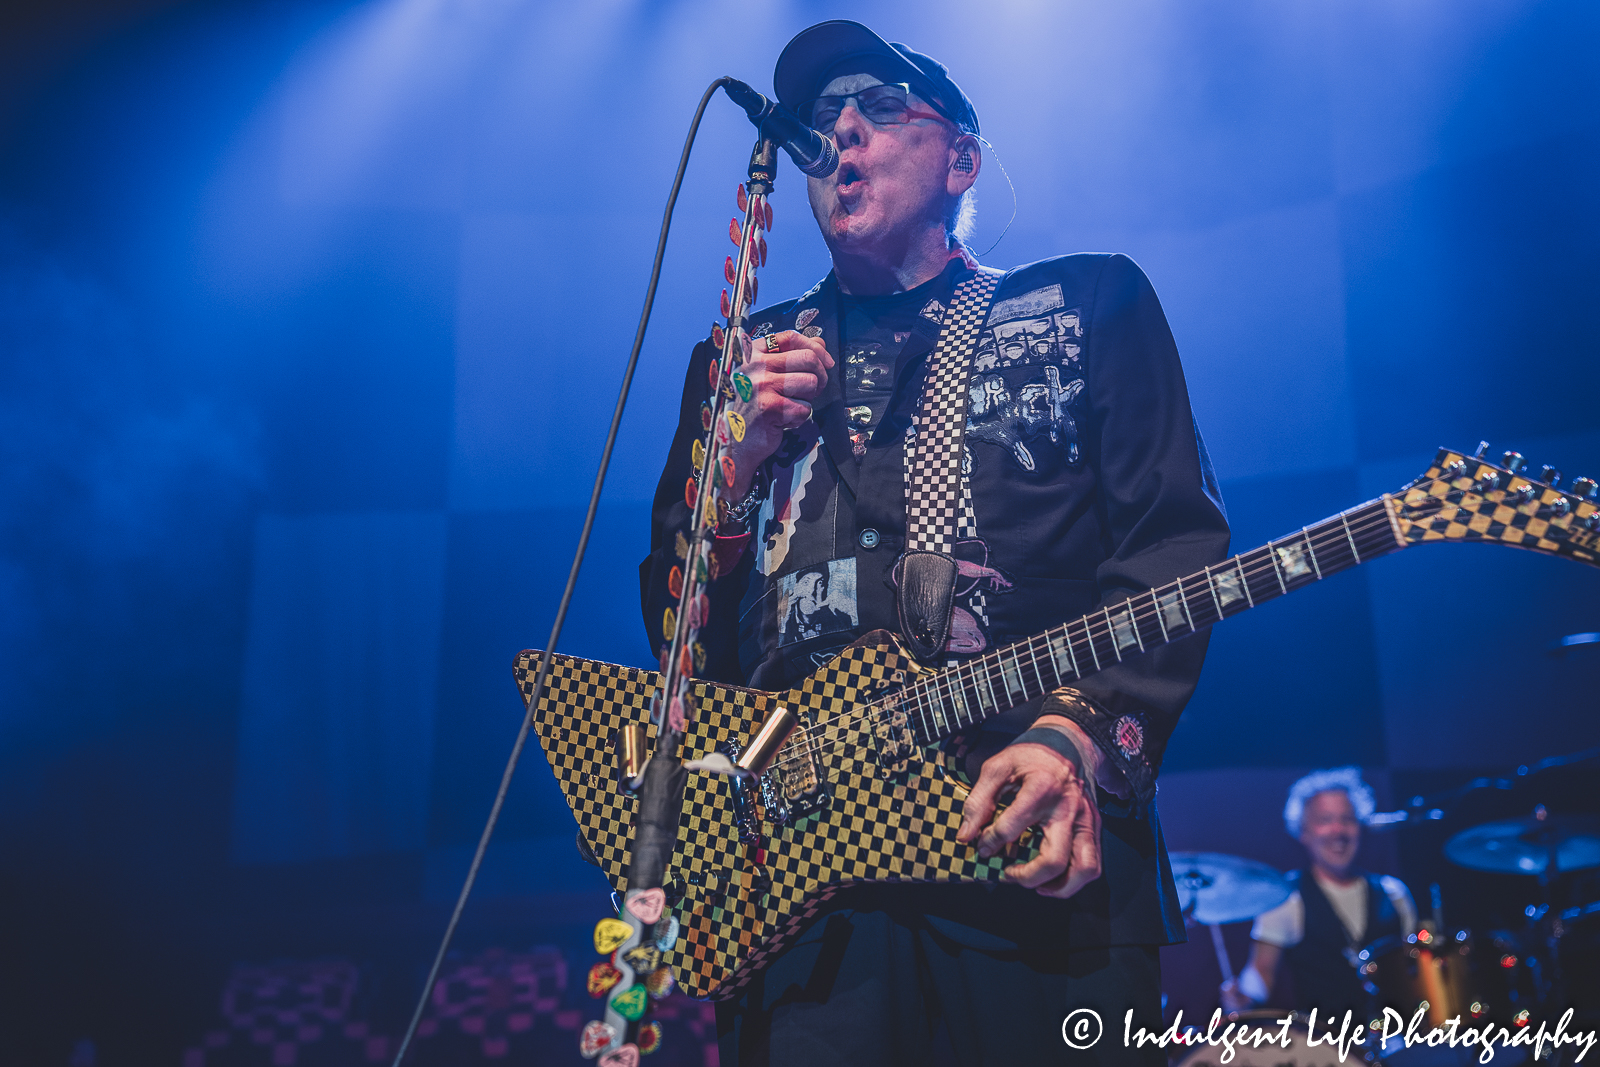 Cheap Trick guitarist Rick Nielsen performing "Dream Police" live in concert at Uptown Theater in Kansas City, MO on September 13, 2022.